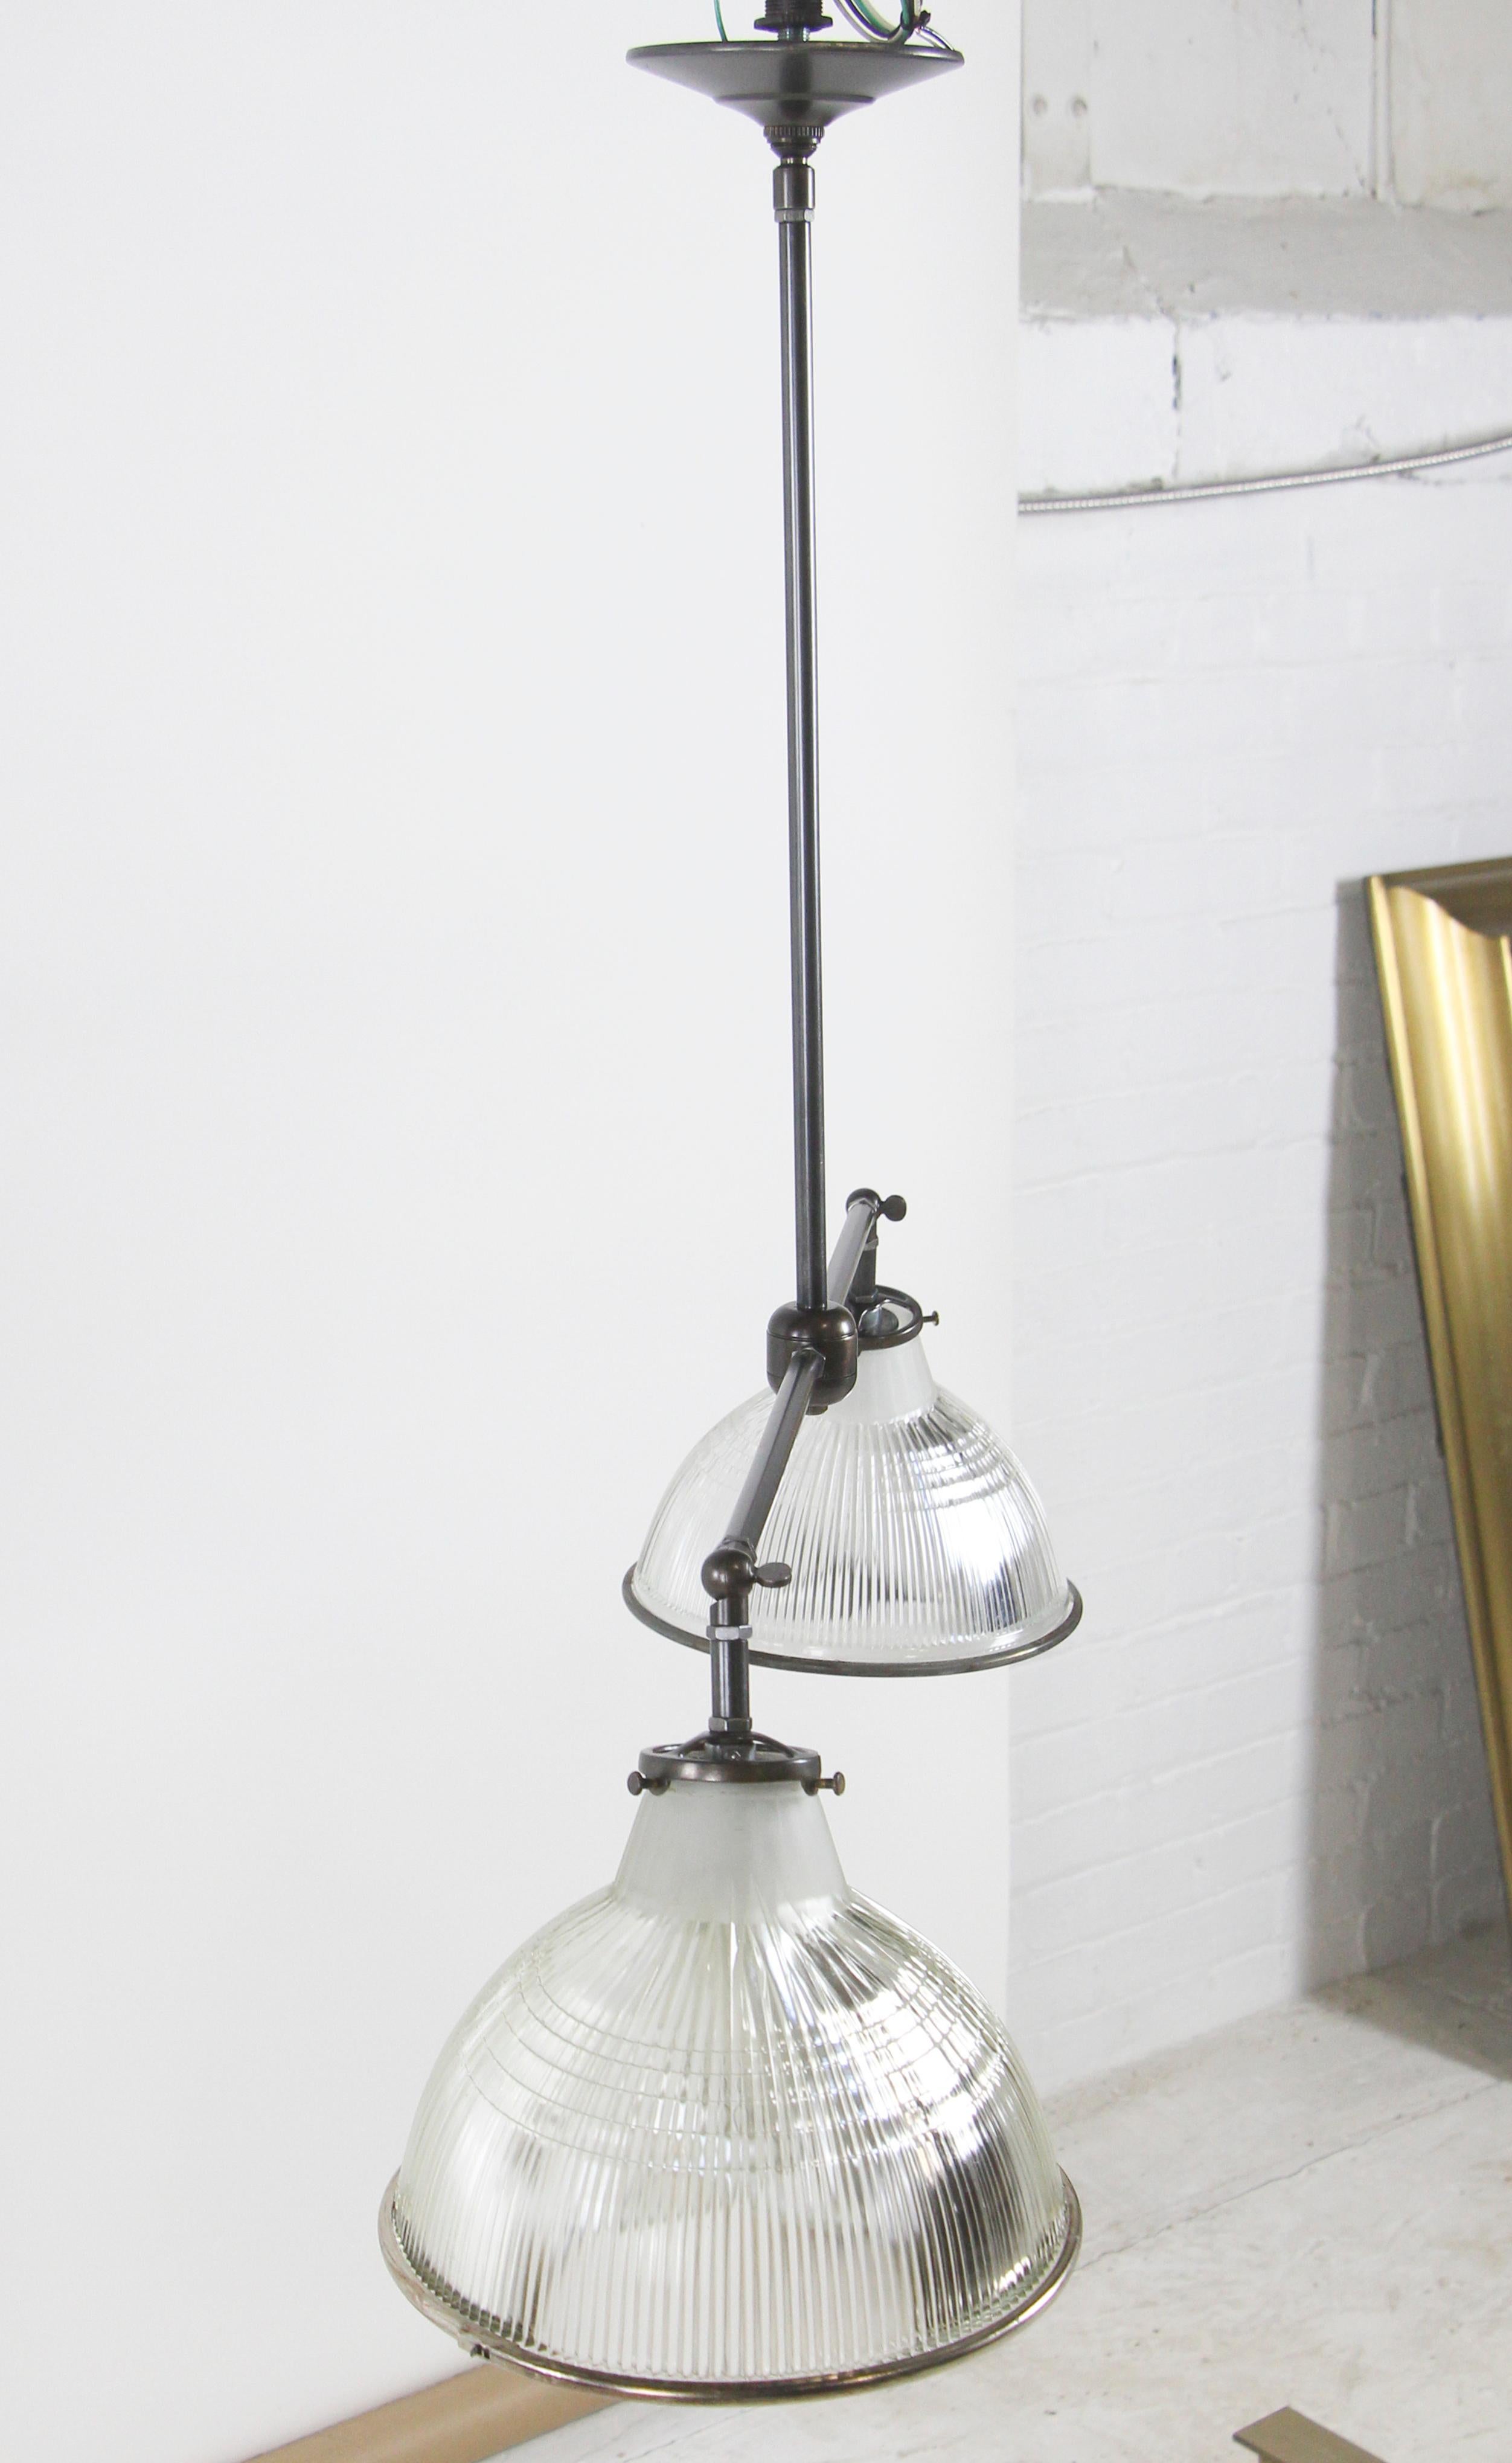 North American Modern Double Industrial Pendant Light with Antique Adjustable Shades